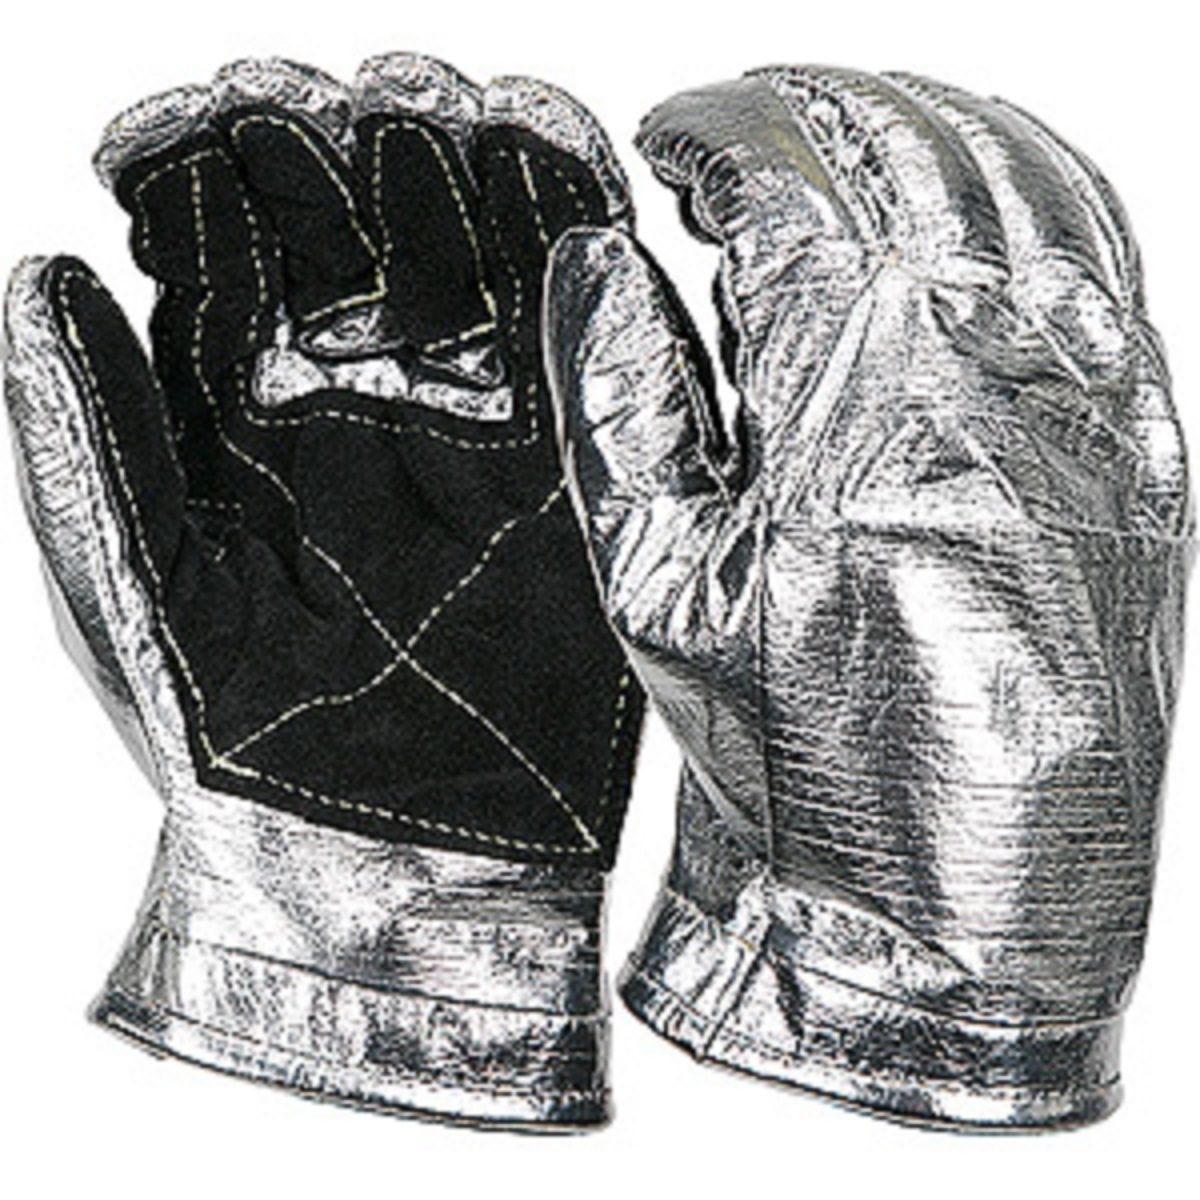 Shelby 5200G ARFF/Proximity Gloves with Steamblock, Gauntlet, Pack of 6